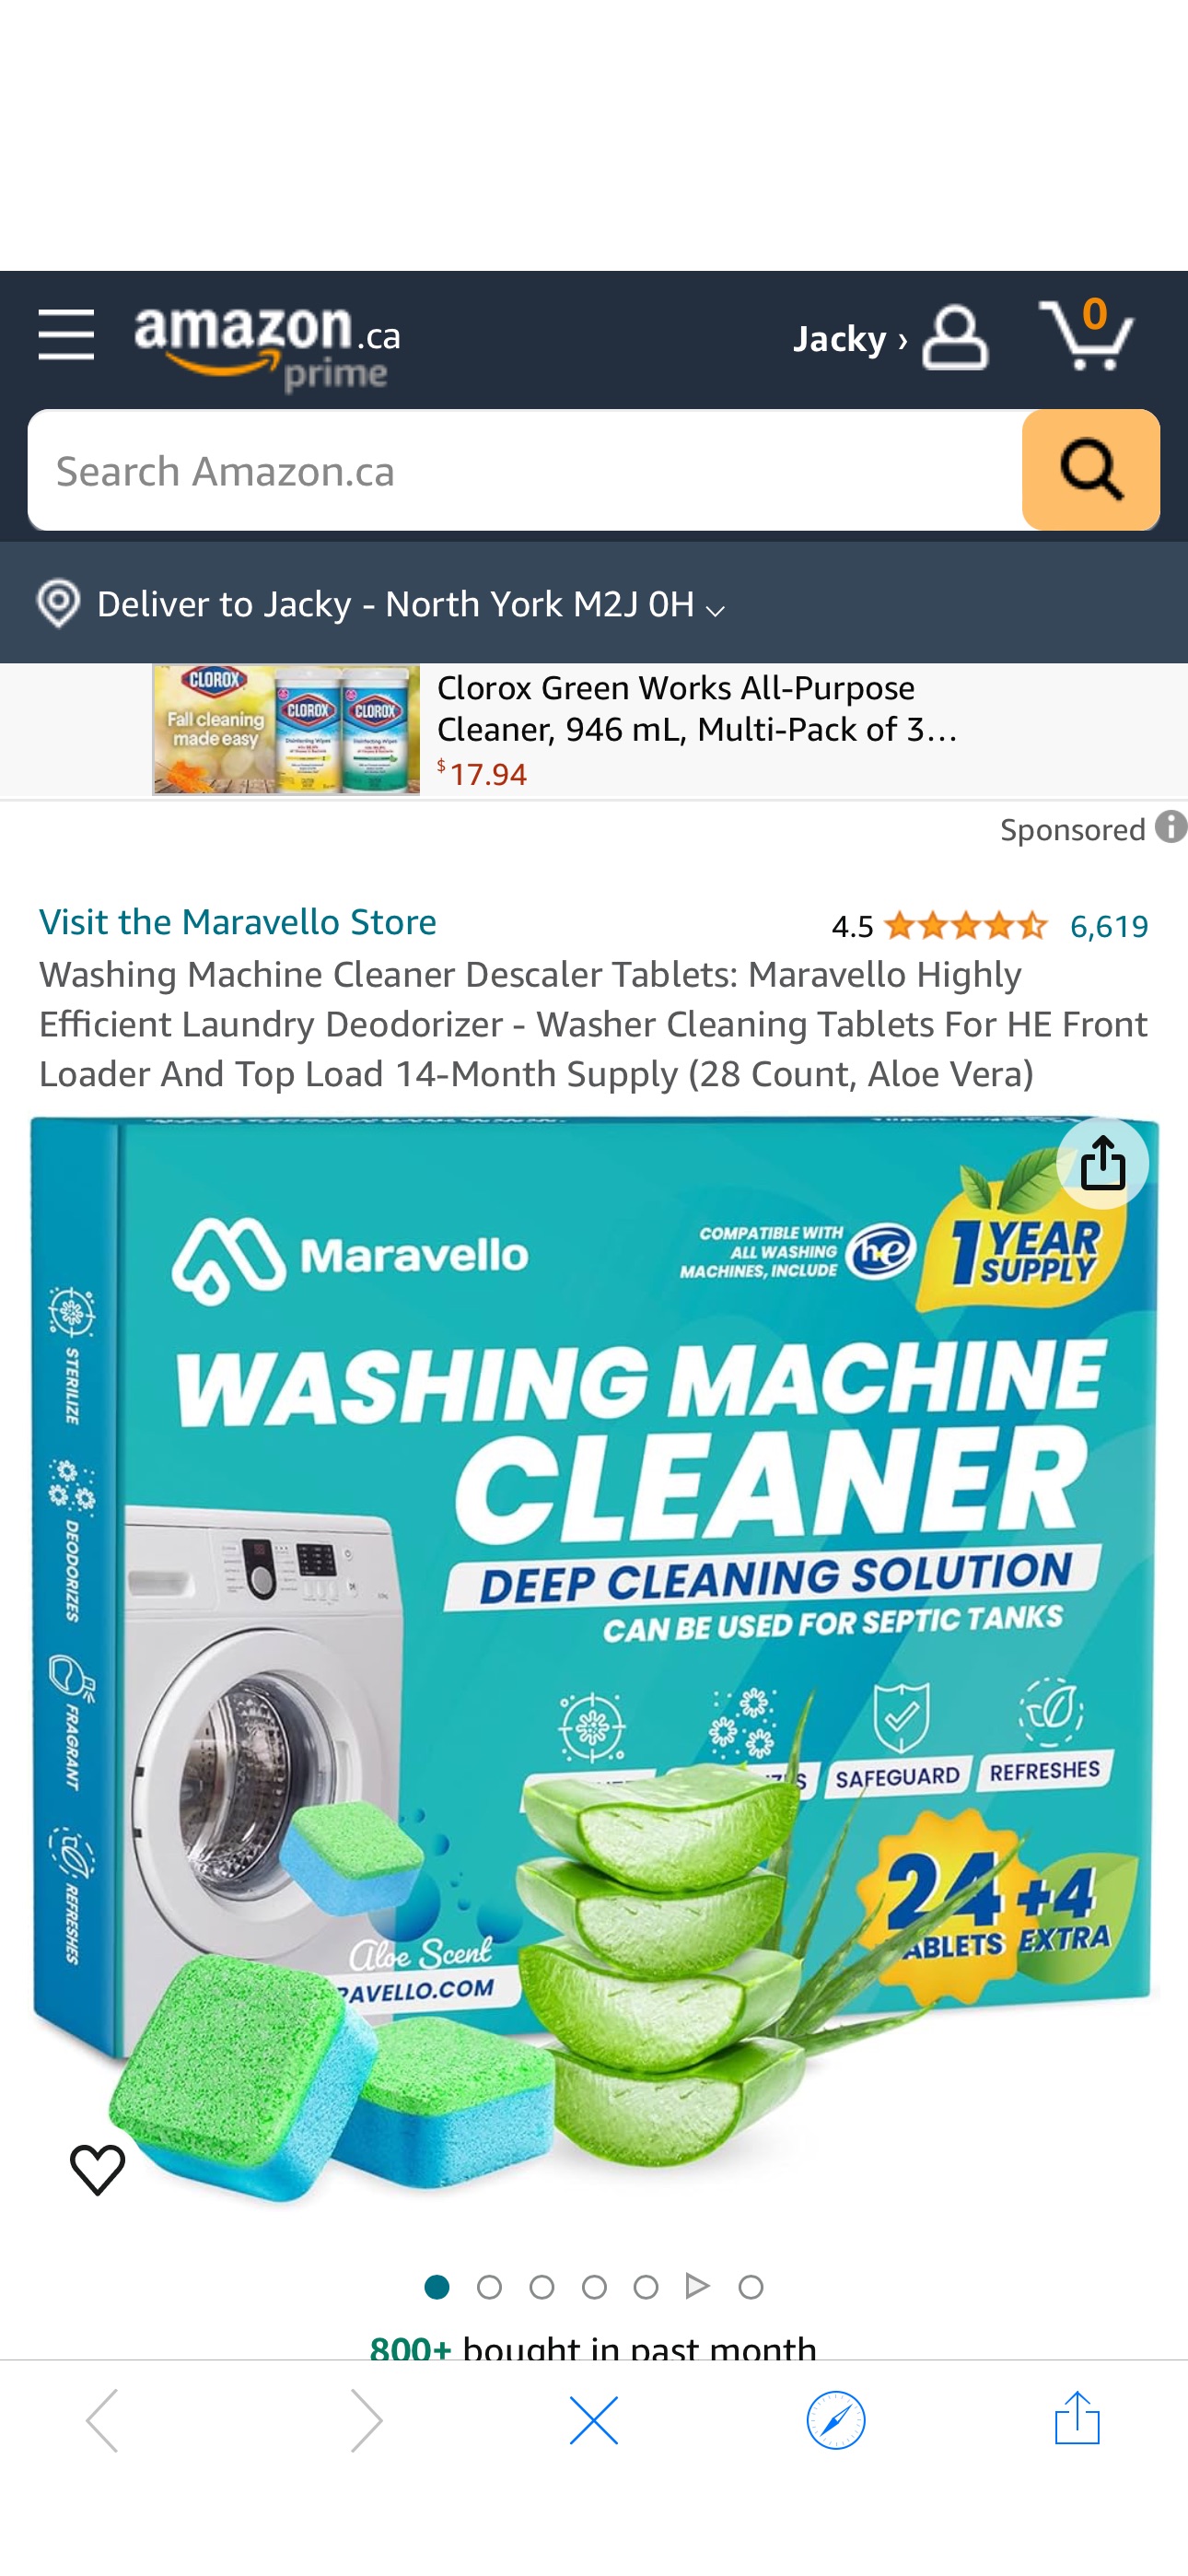 Washing Machine Cleaner Descaler Tablets: Maravello Highly Efficient Laundry Deodorizer - Washer Cleaning Tablets For HE Front Loader And Top Load 14-Month Supply (28 Count, Aloe Vera) : Amazon.ca: He